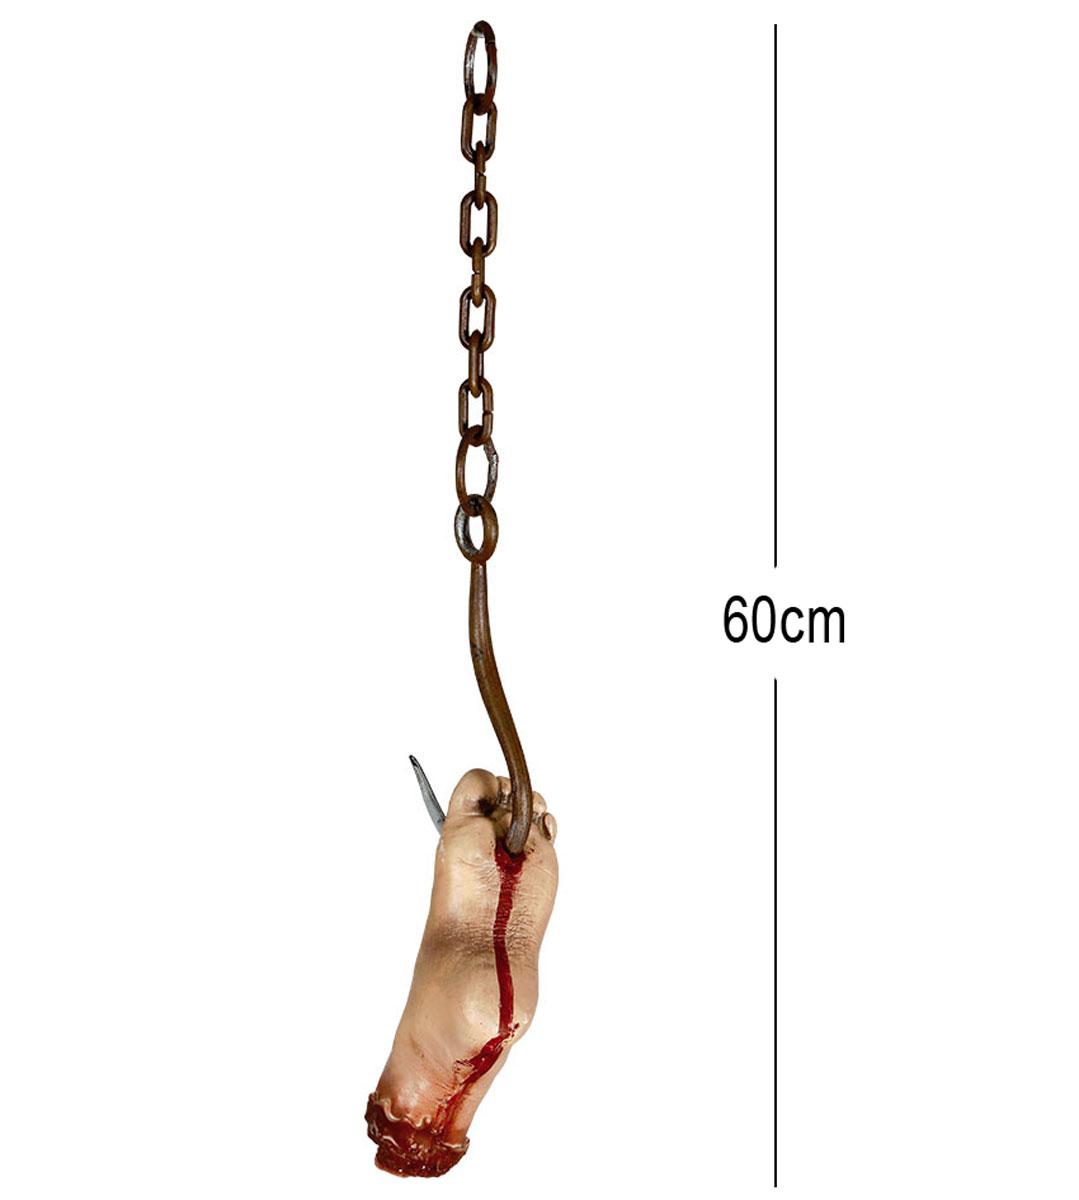 Severed Foot on Spike and Chain 60cm. Great detail and rust effect chain and hook by Guirca 19849 available in the UK here at Karnival Costumes online Halloween party shop